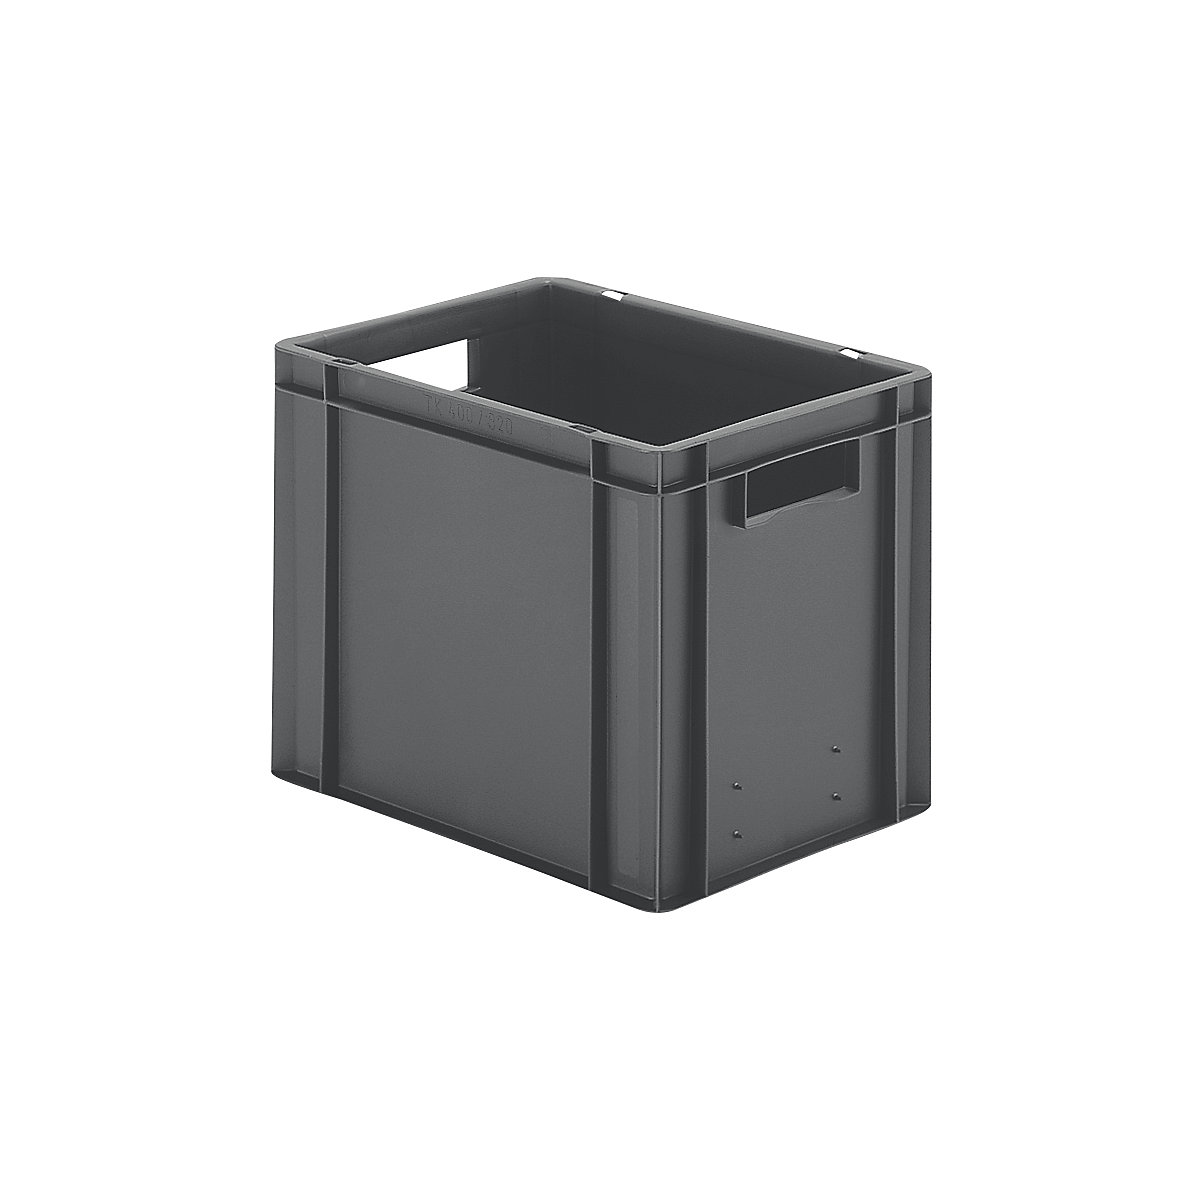 Euro stacking container, closed walls and base, LxWxH 400 x 300 x 320 mm, grey, pack of 5